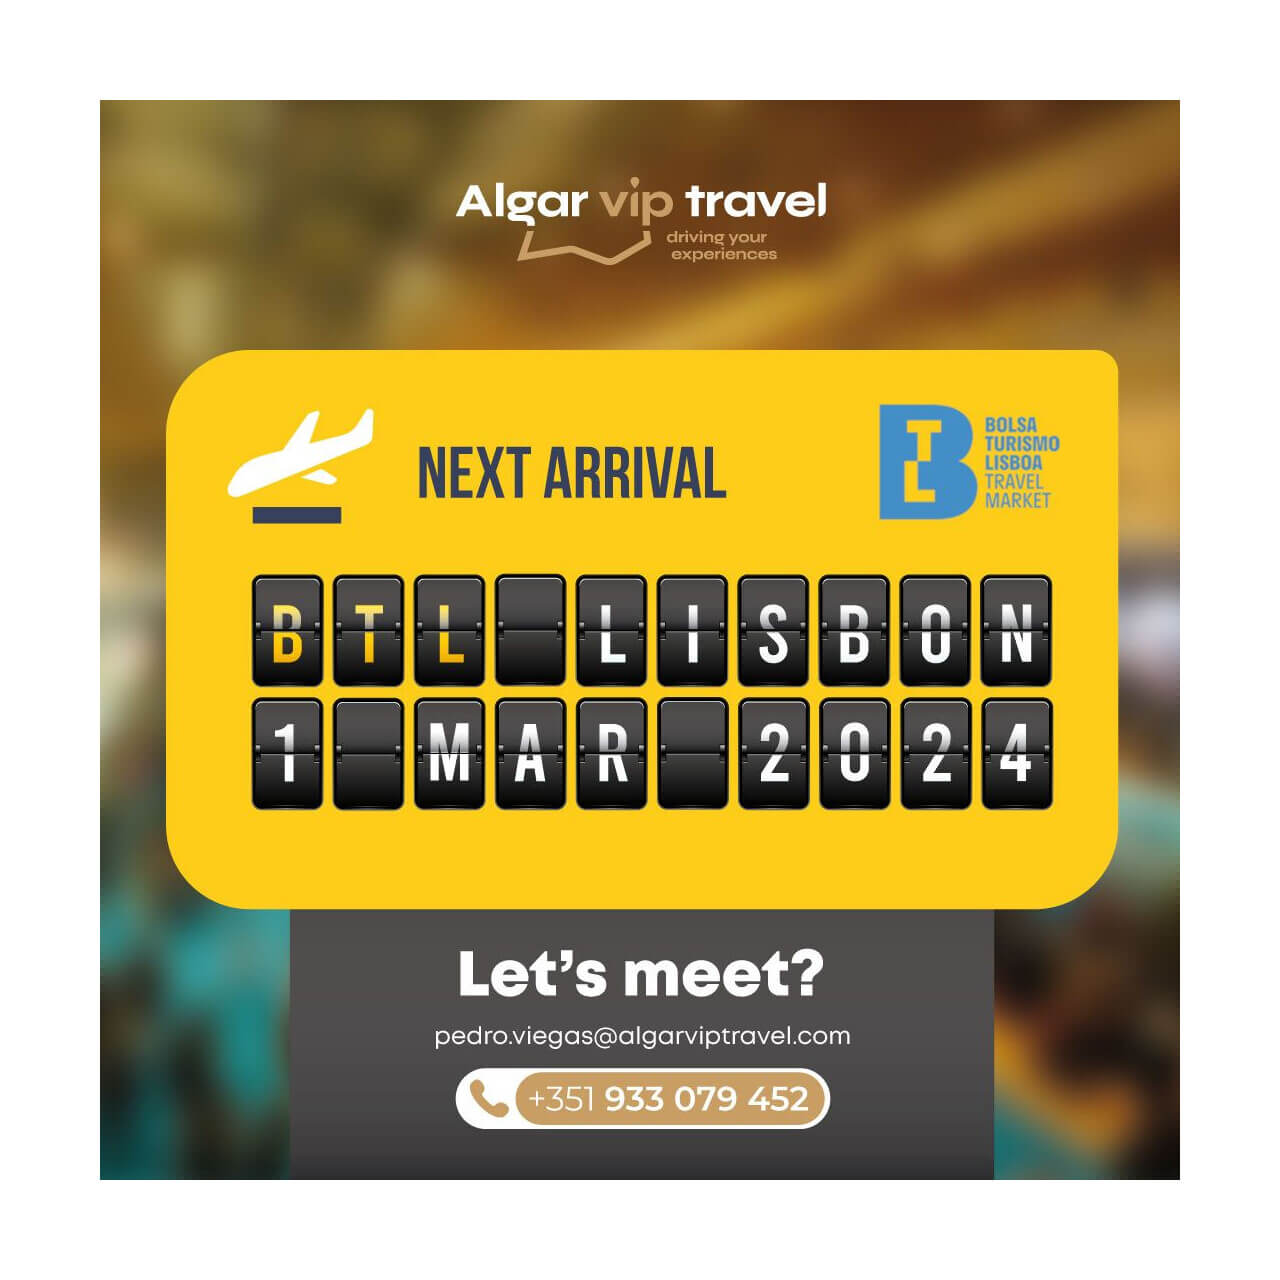 Innovation and Excellence in Luxury Travel that AlgarvipTravel will share with its Partners at BTL 2024